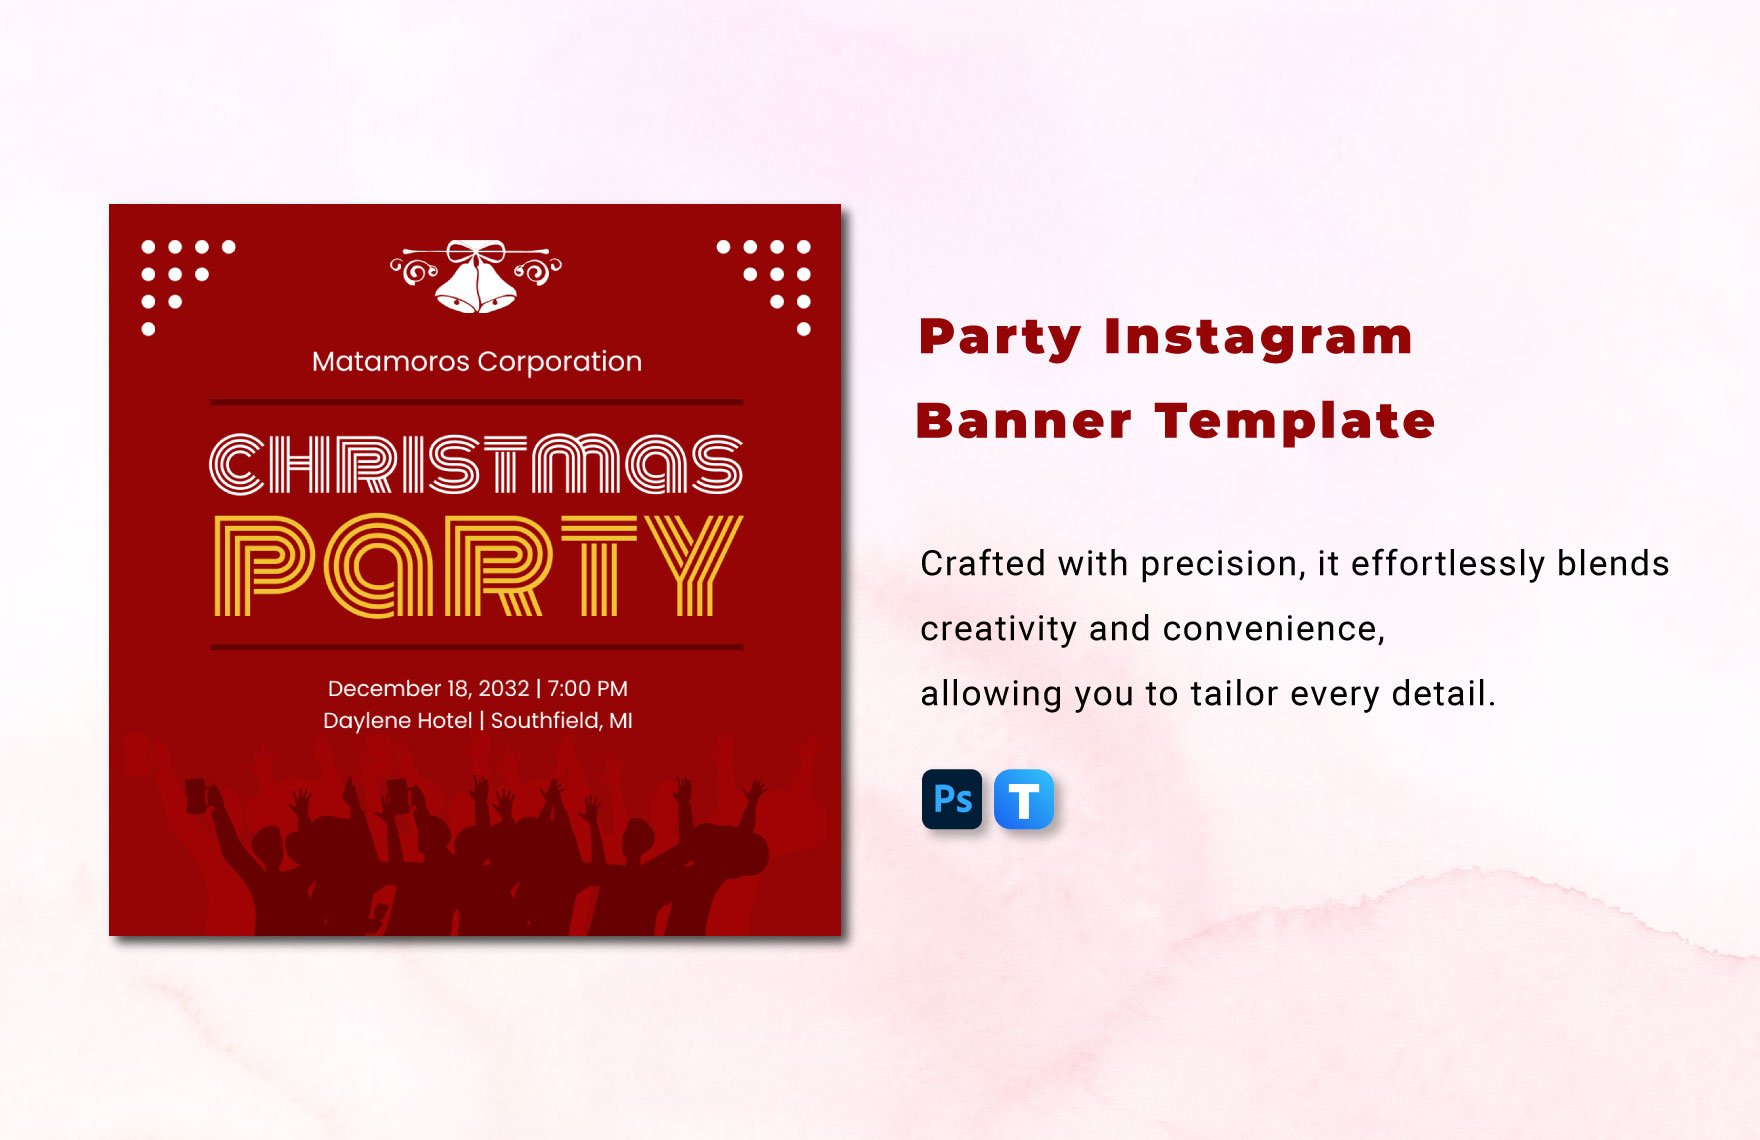 Party Instagram Banner Template